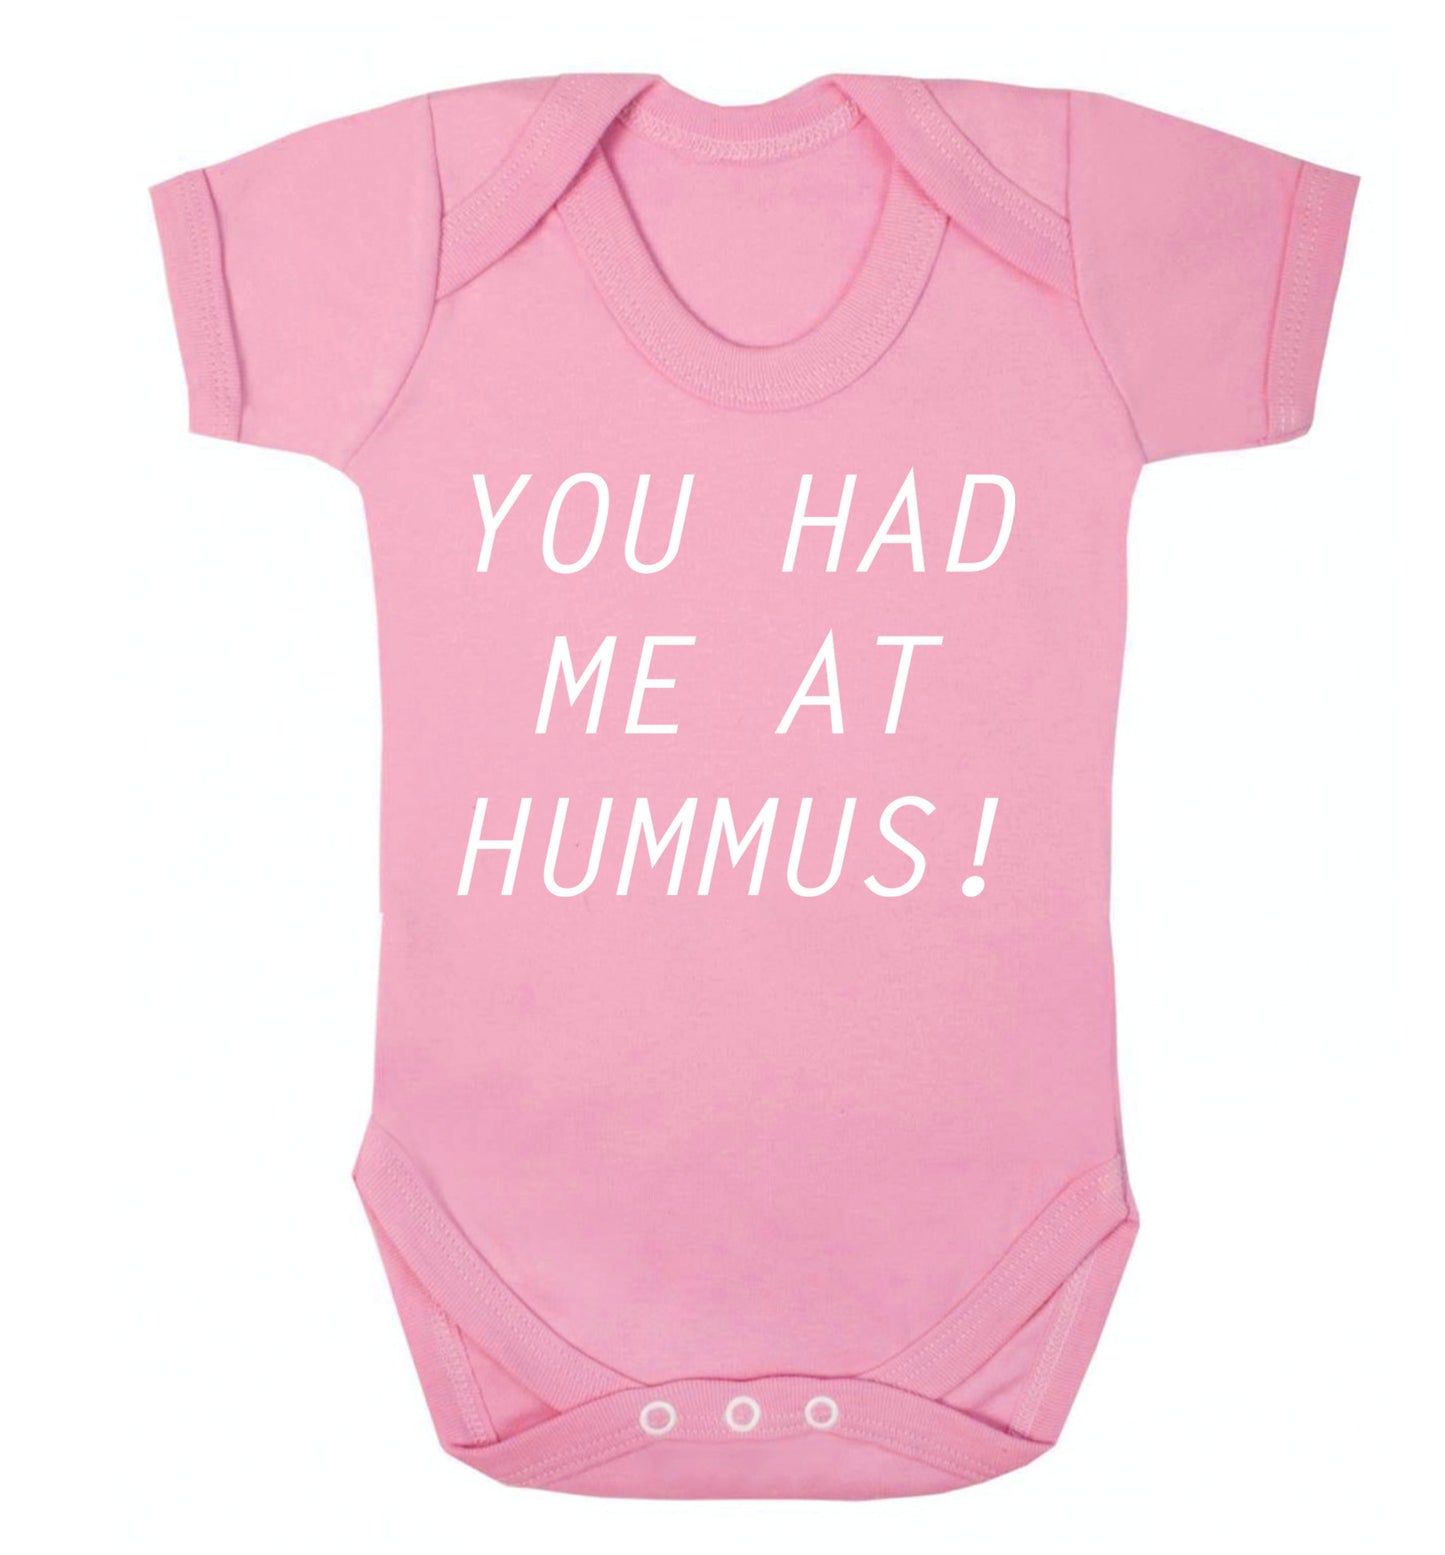 You had me at hummus Baby Vest pale pink 18-24 months